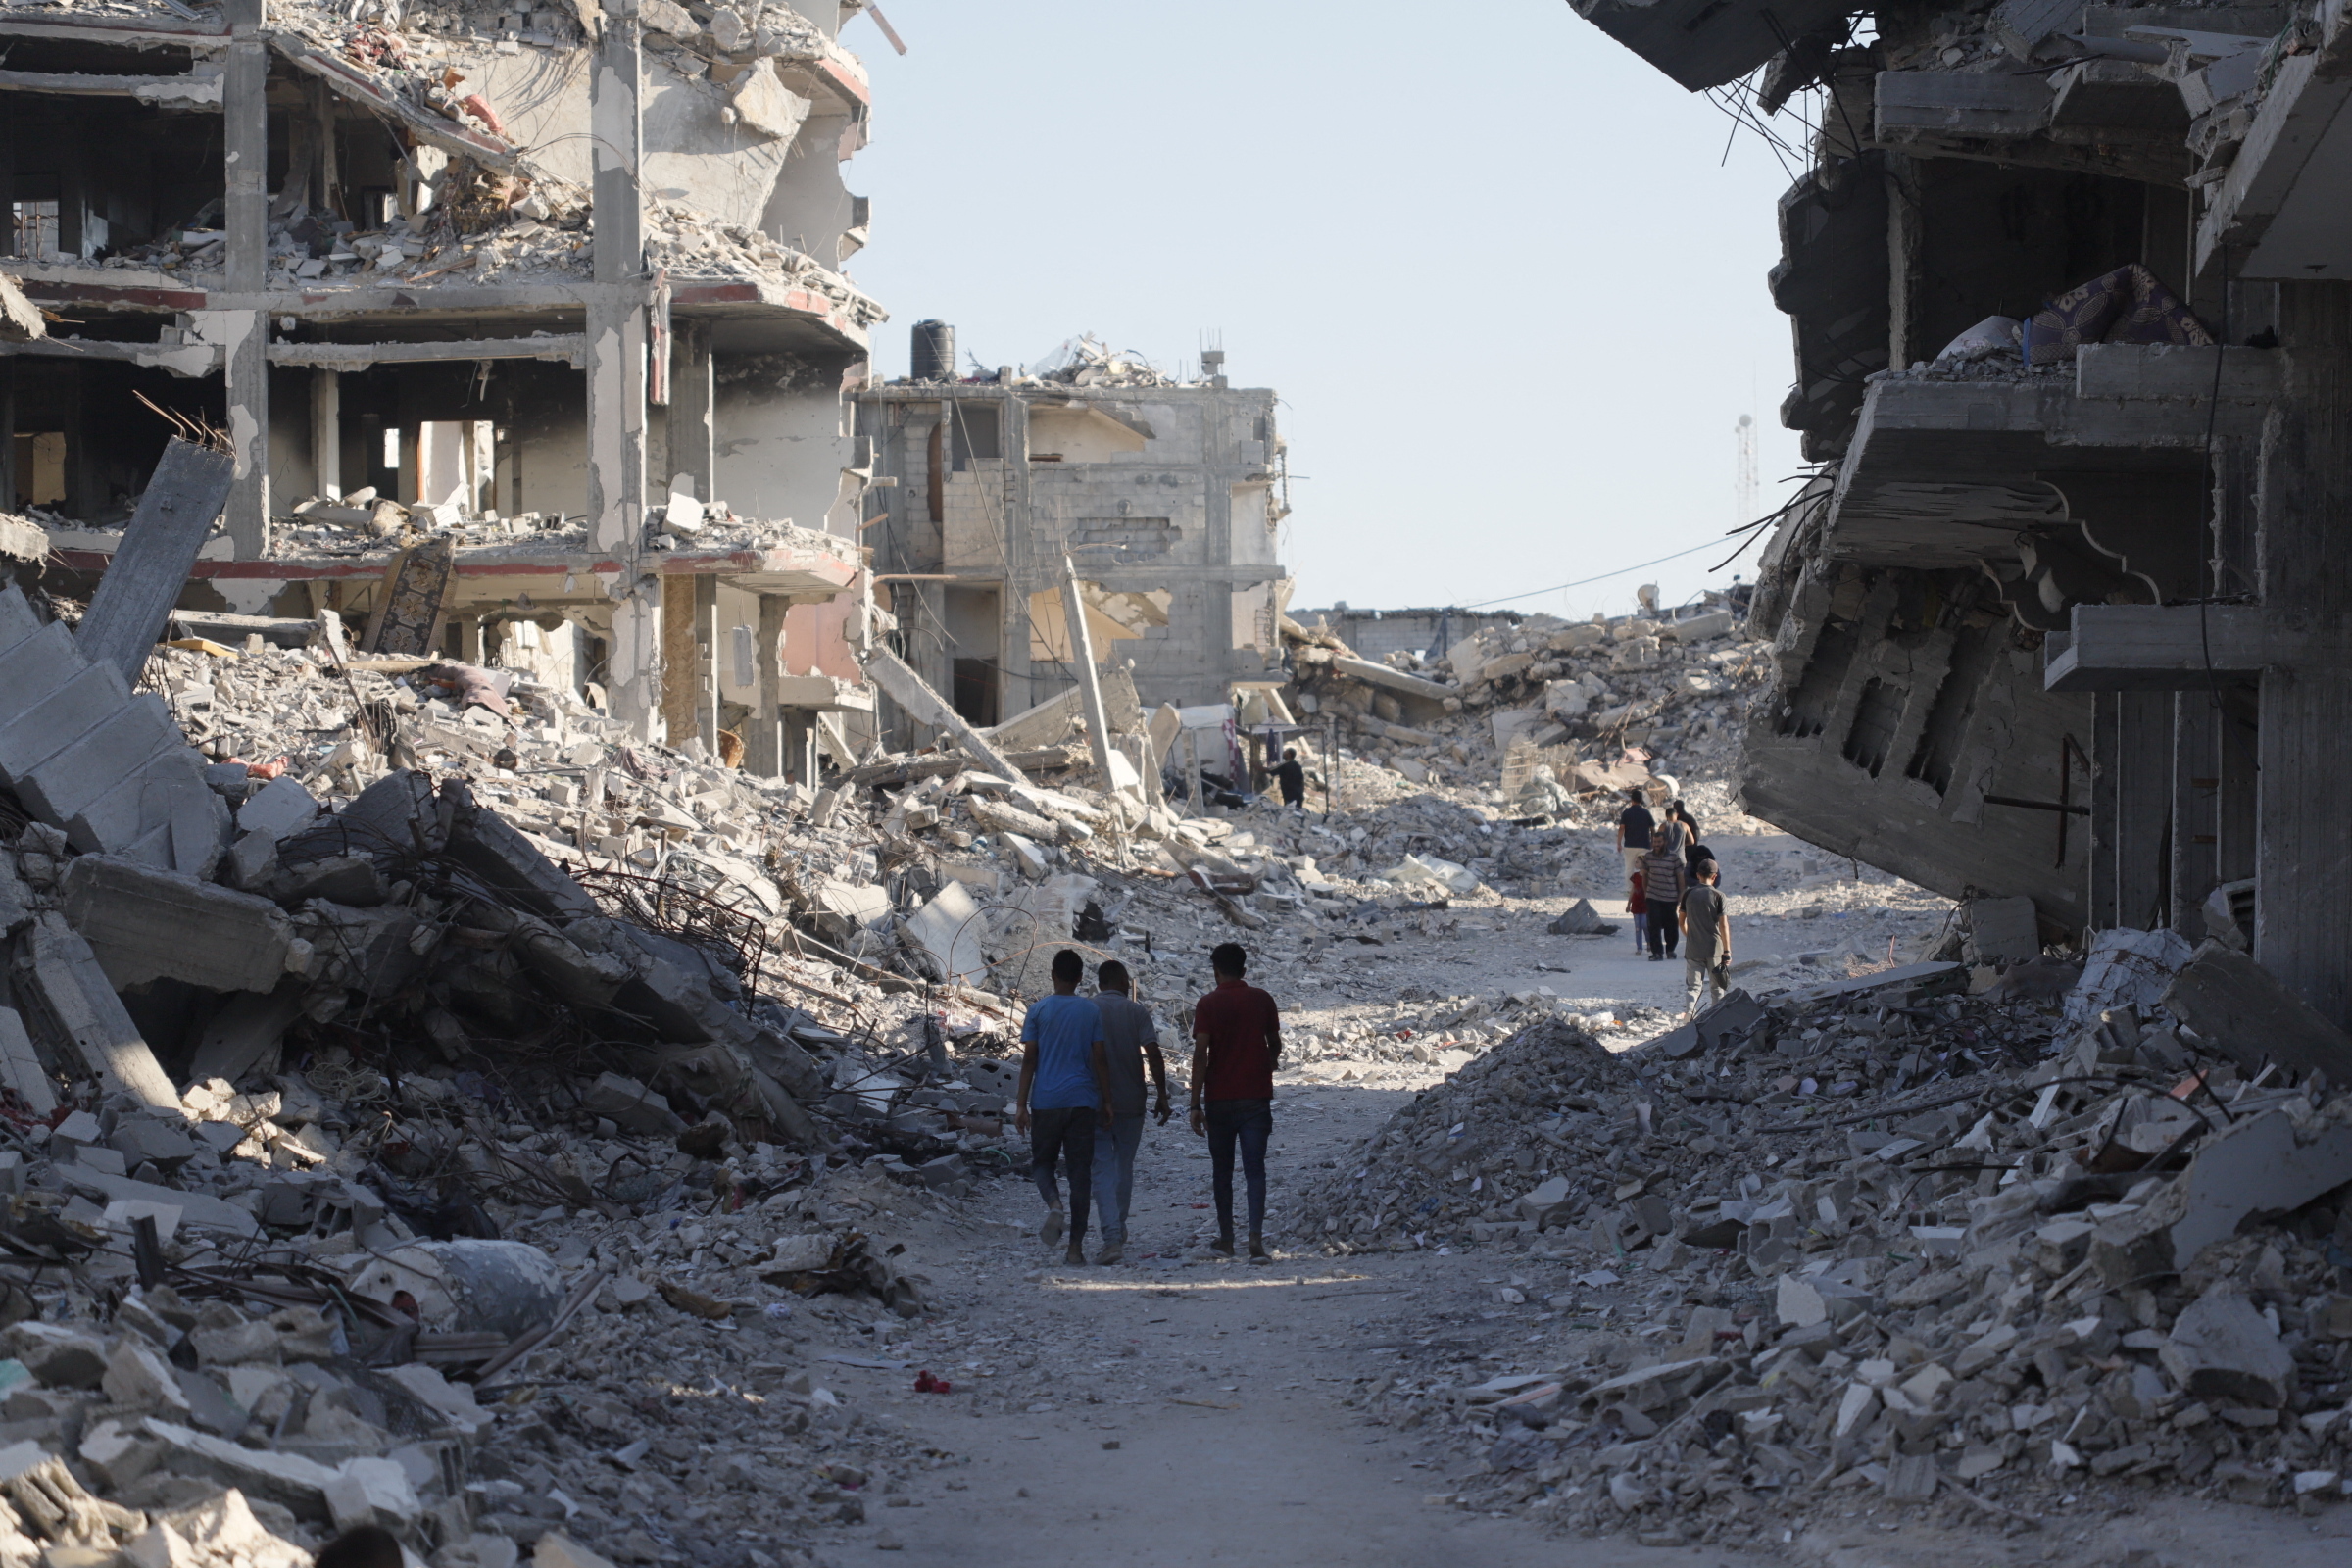 The photo shows the extent of the destruction in Gaza and two people walking between completely destroyed buildings and rubble.